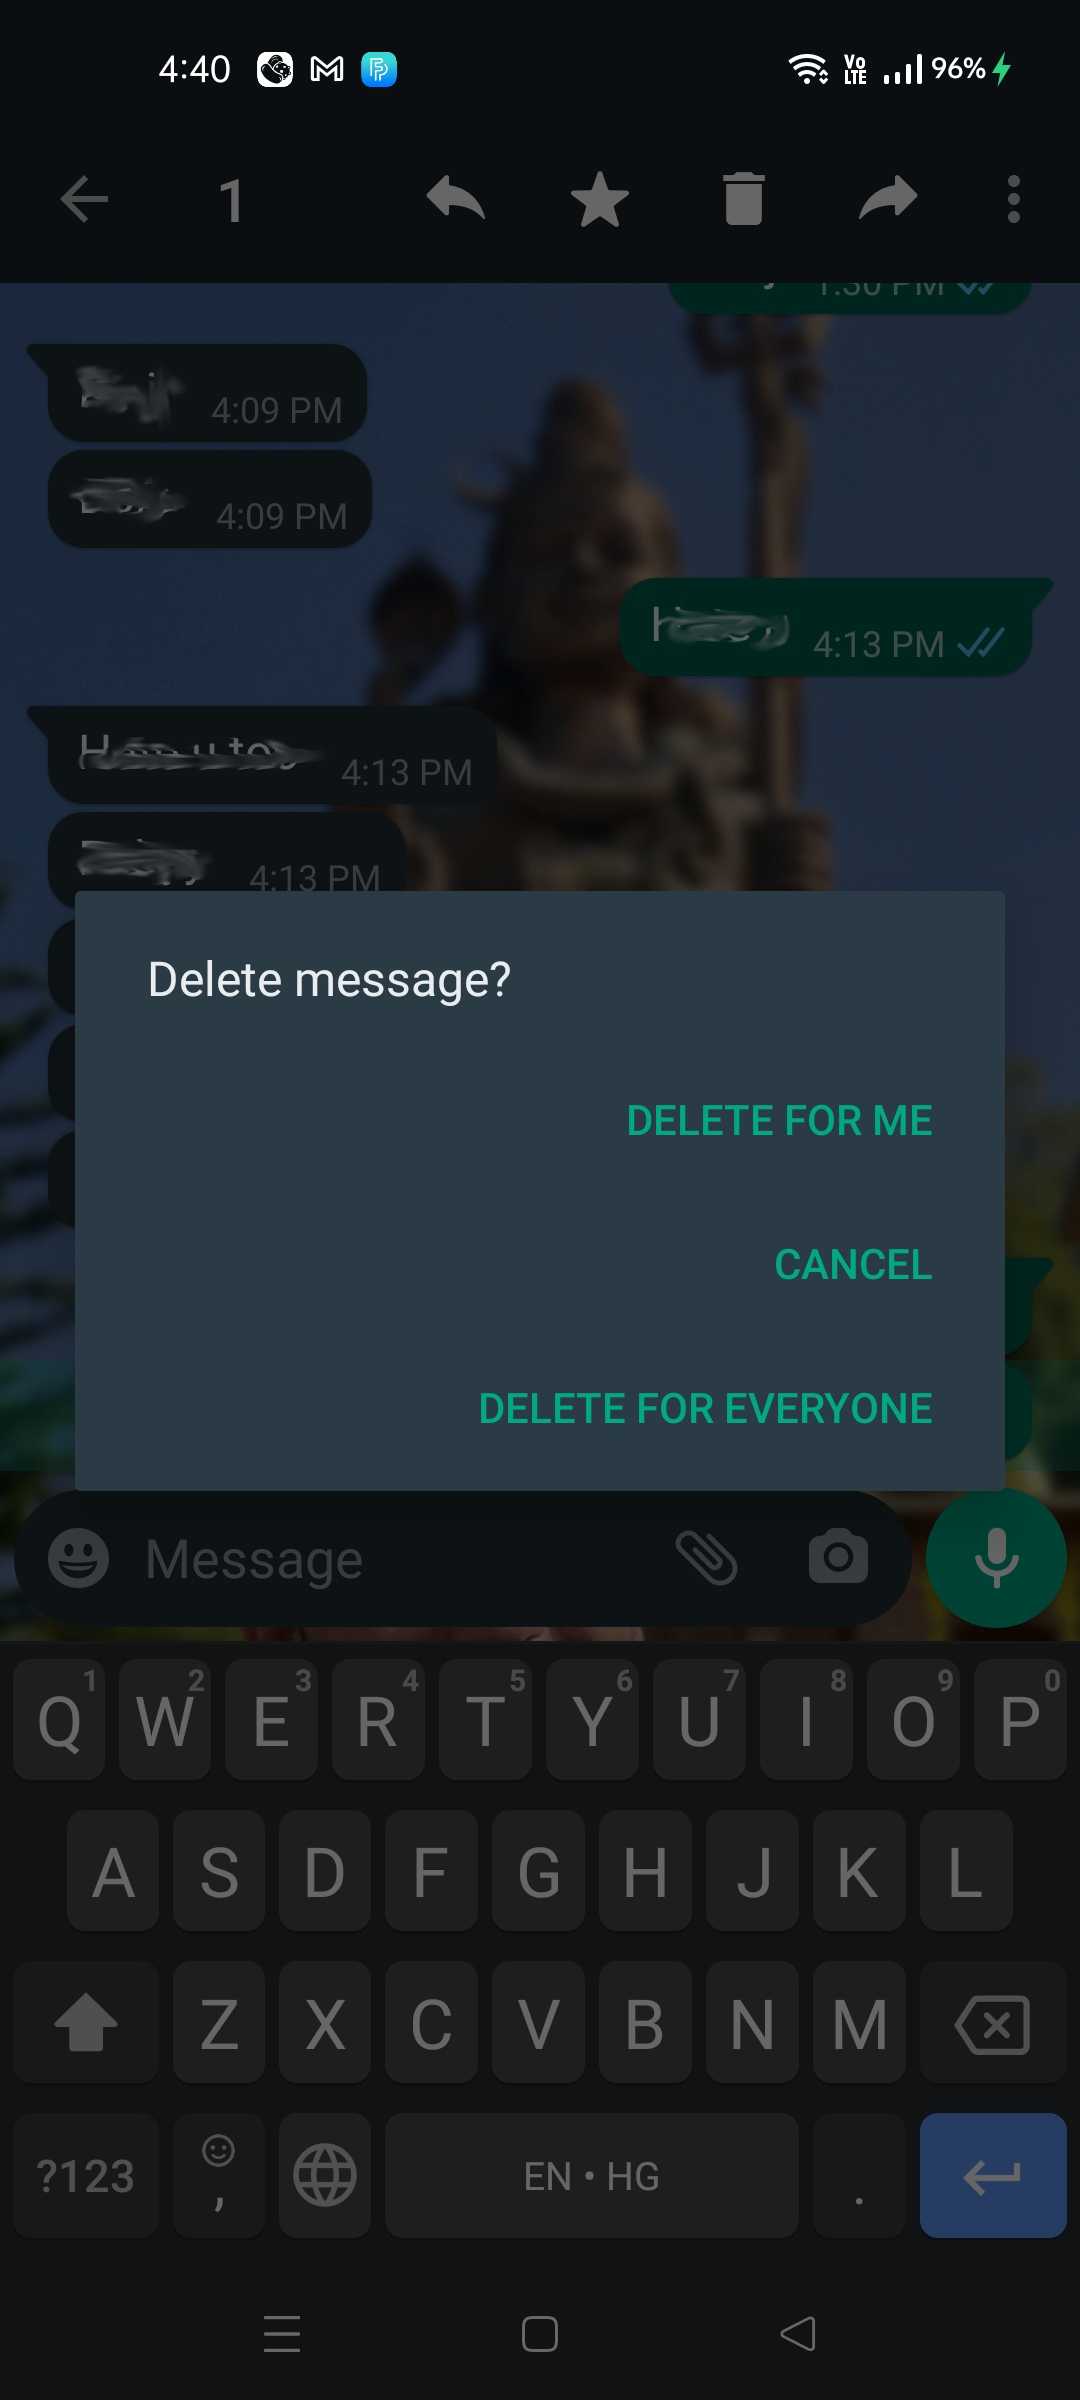 How to delete messages on WhatsApp on android